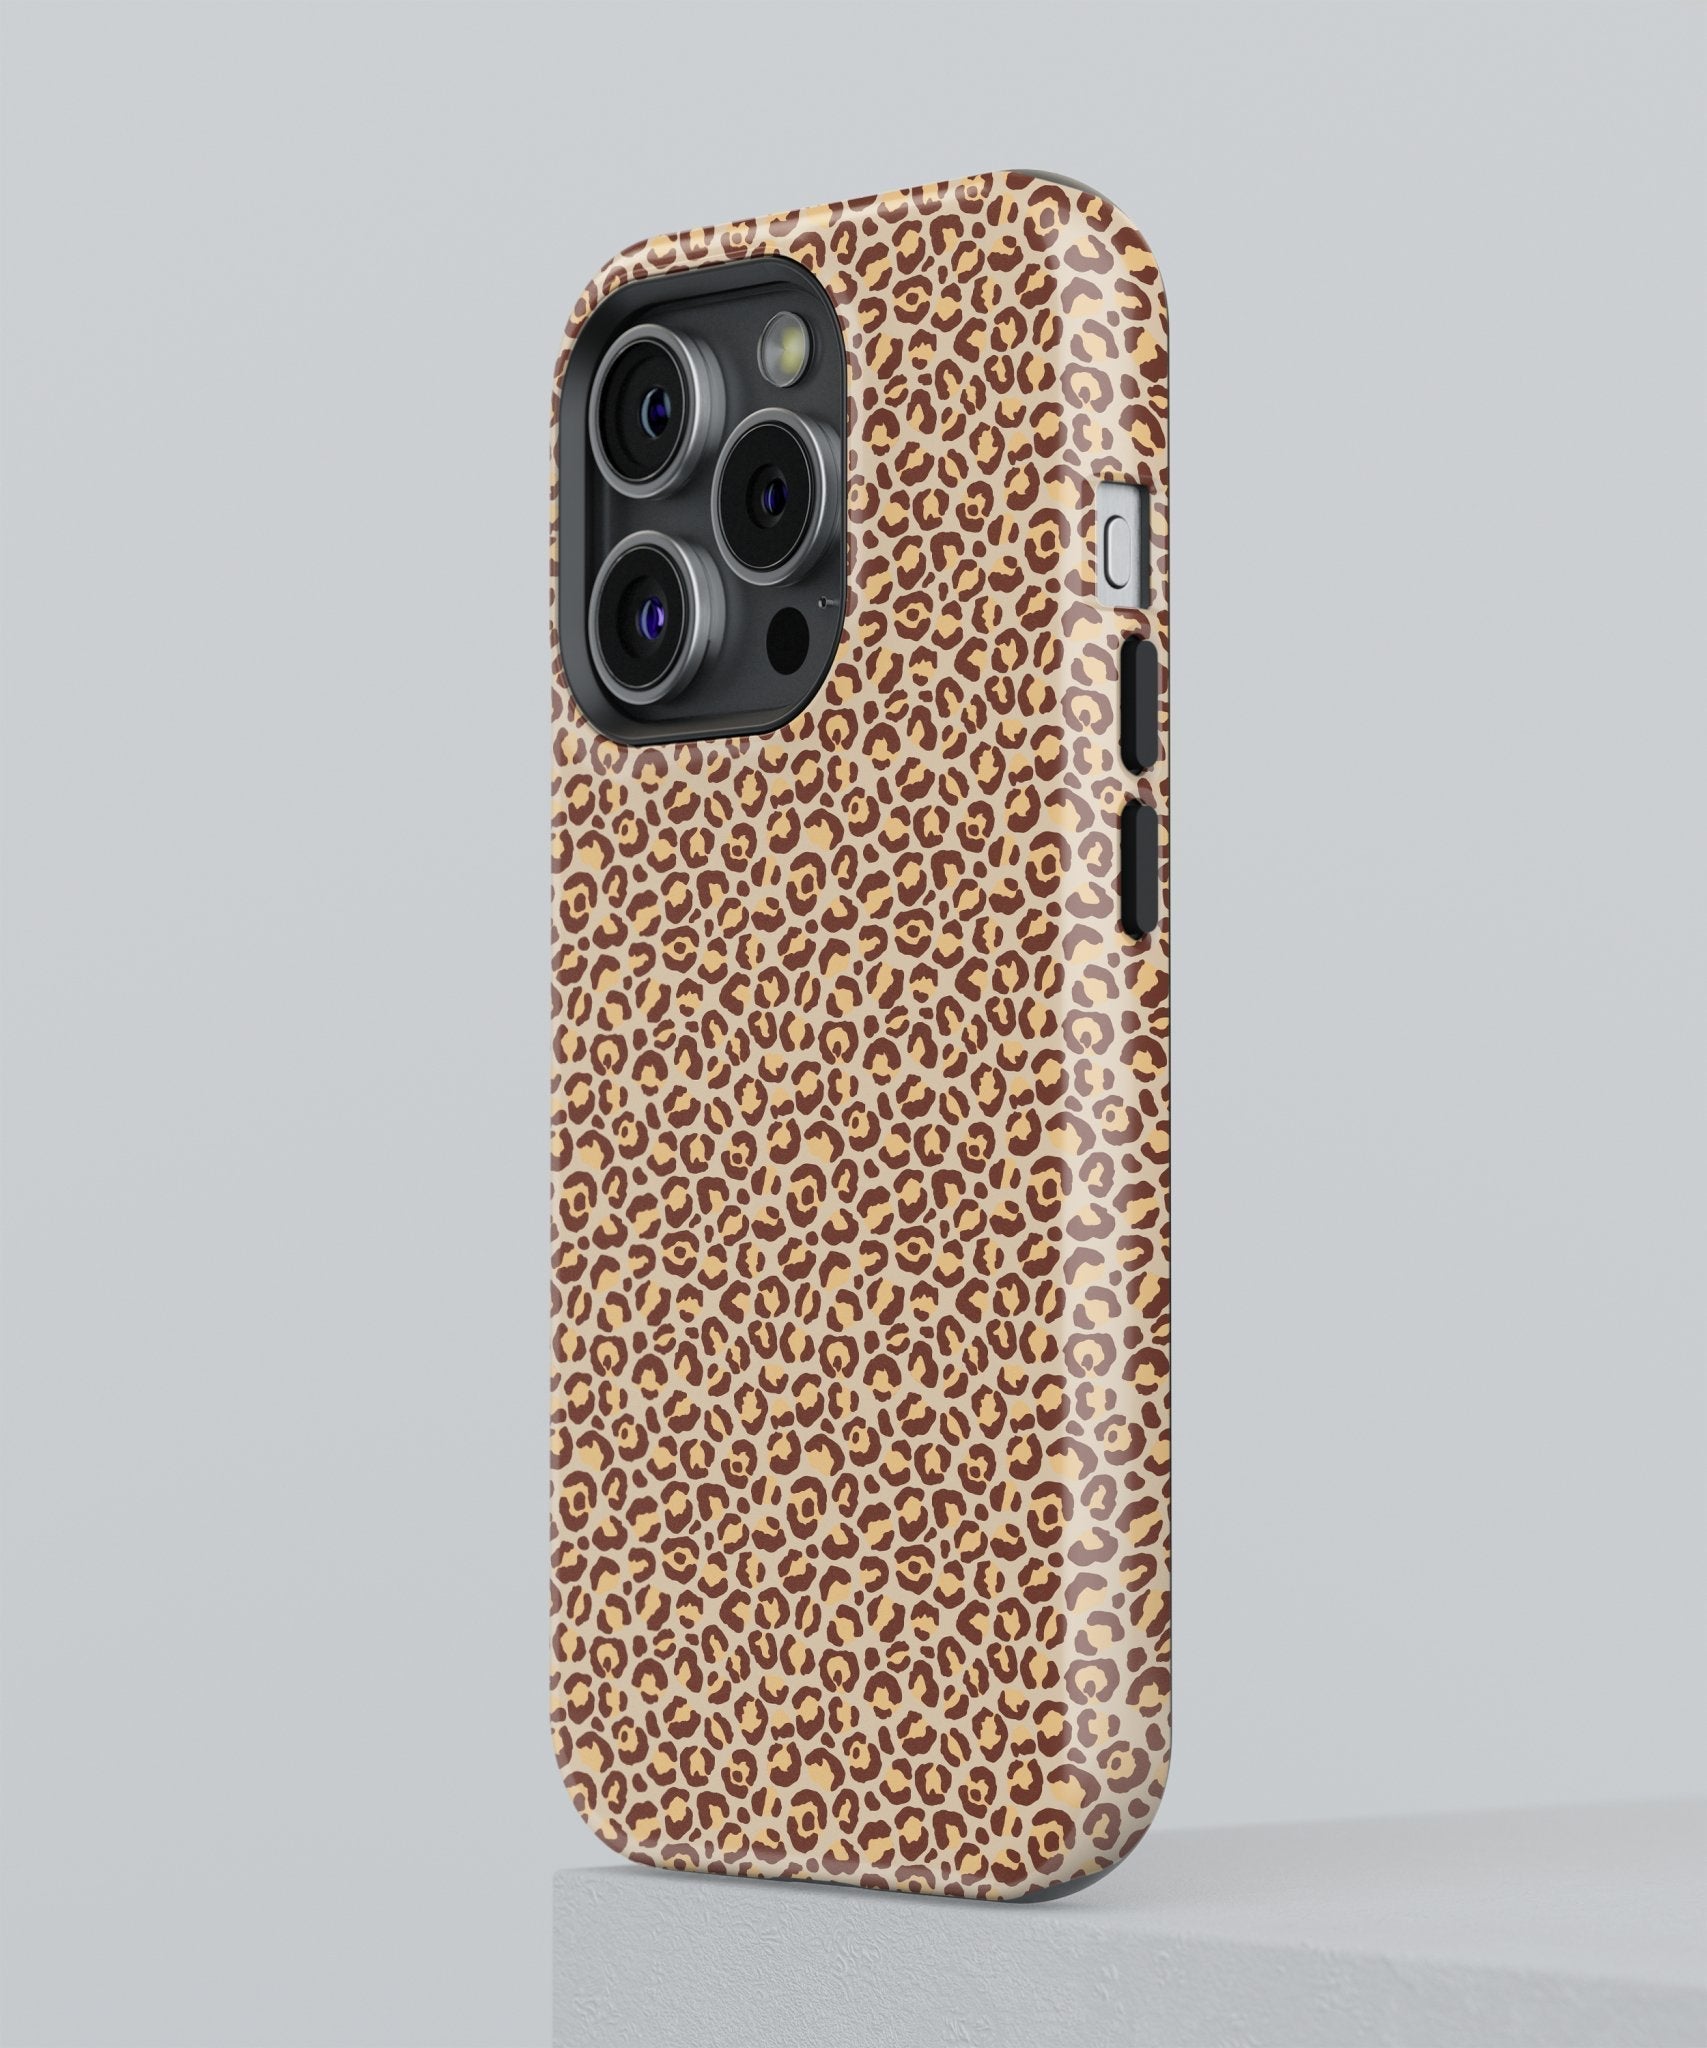 Leopard Dreams in the Moonlight - iPhone Case